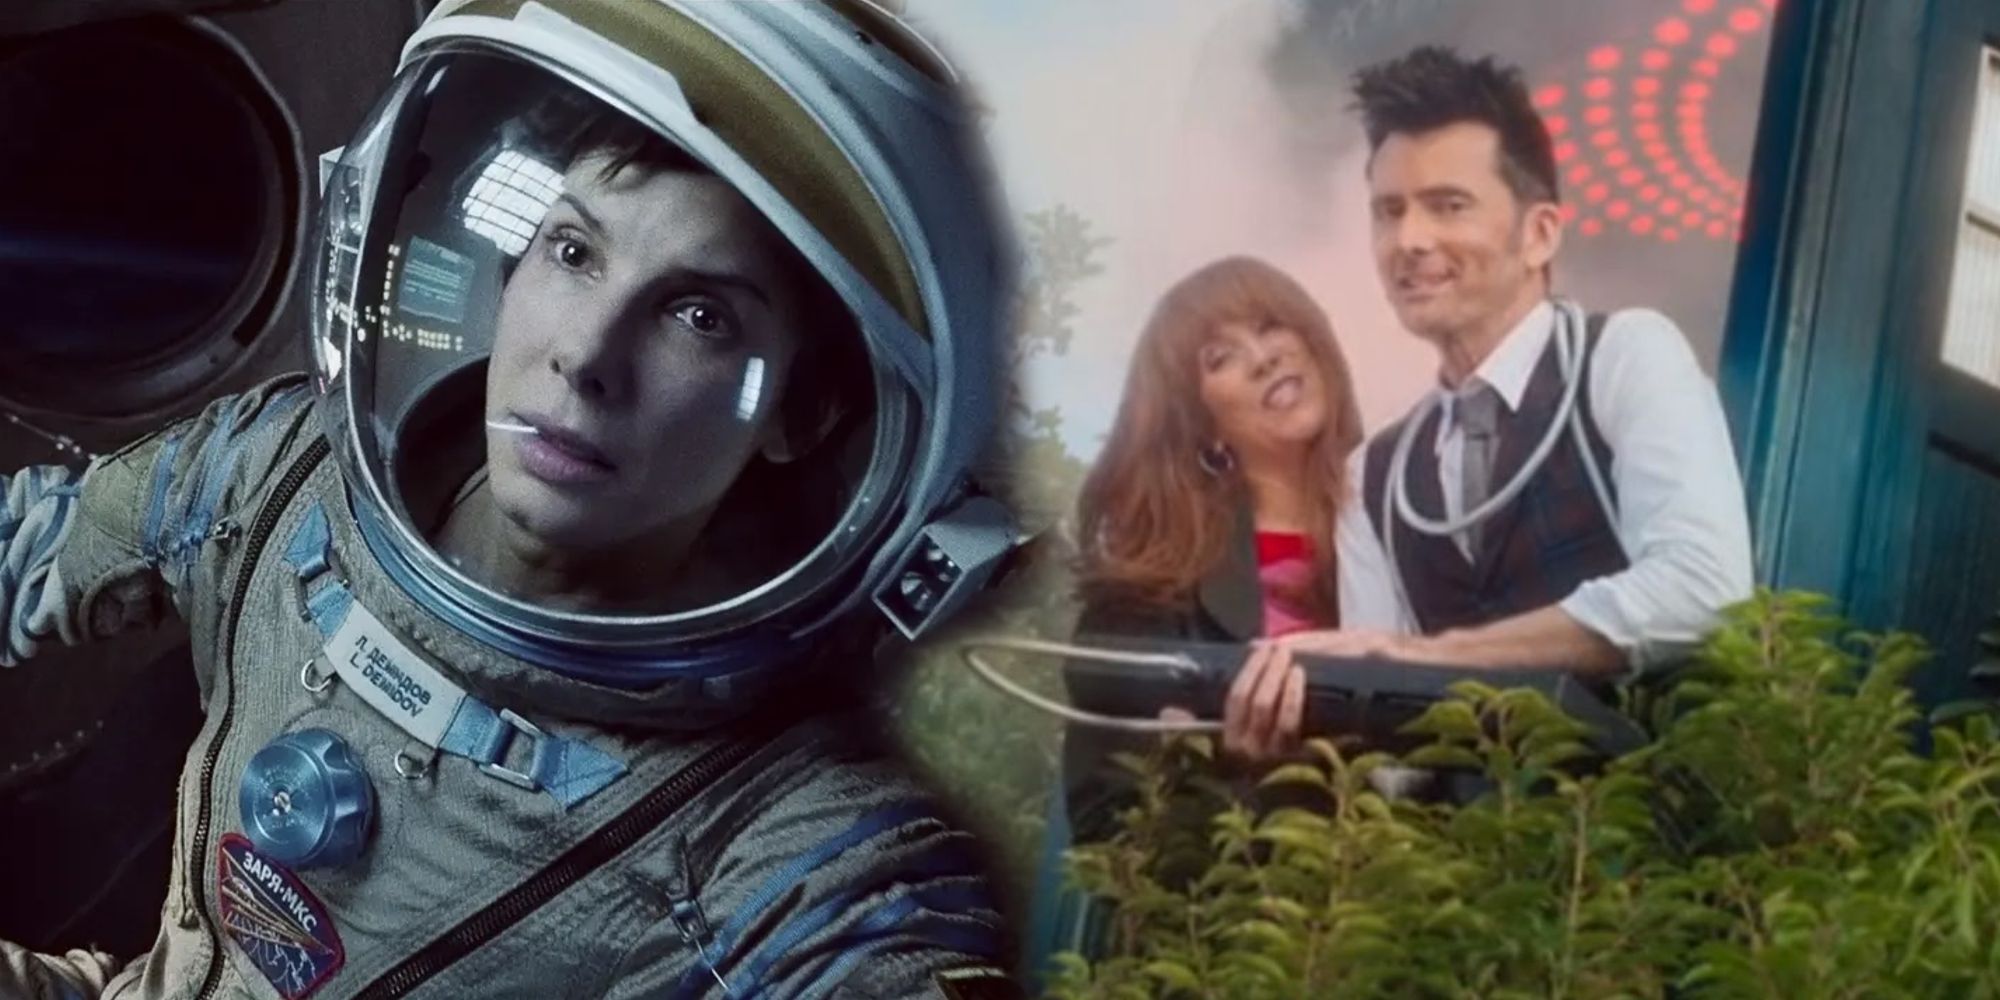 Doctor Who Wild Blue Yonder David Tennant and Catherine Tate as the Fourteenth Doctor and Donna next to Sandra Bullock in Gravity